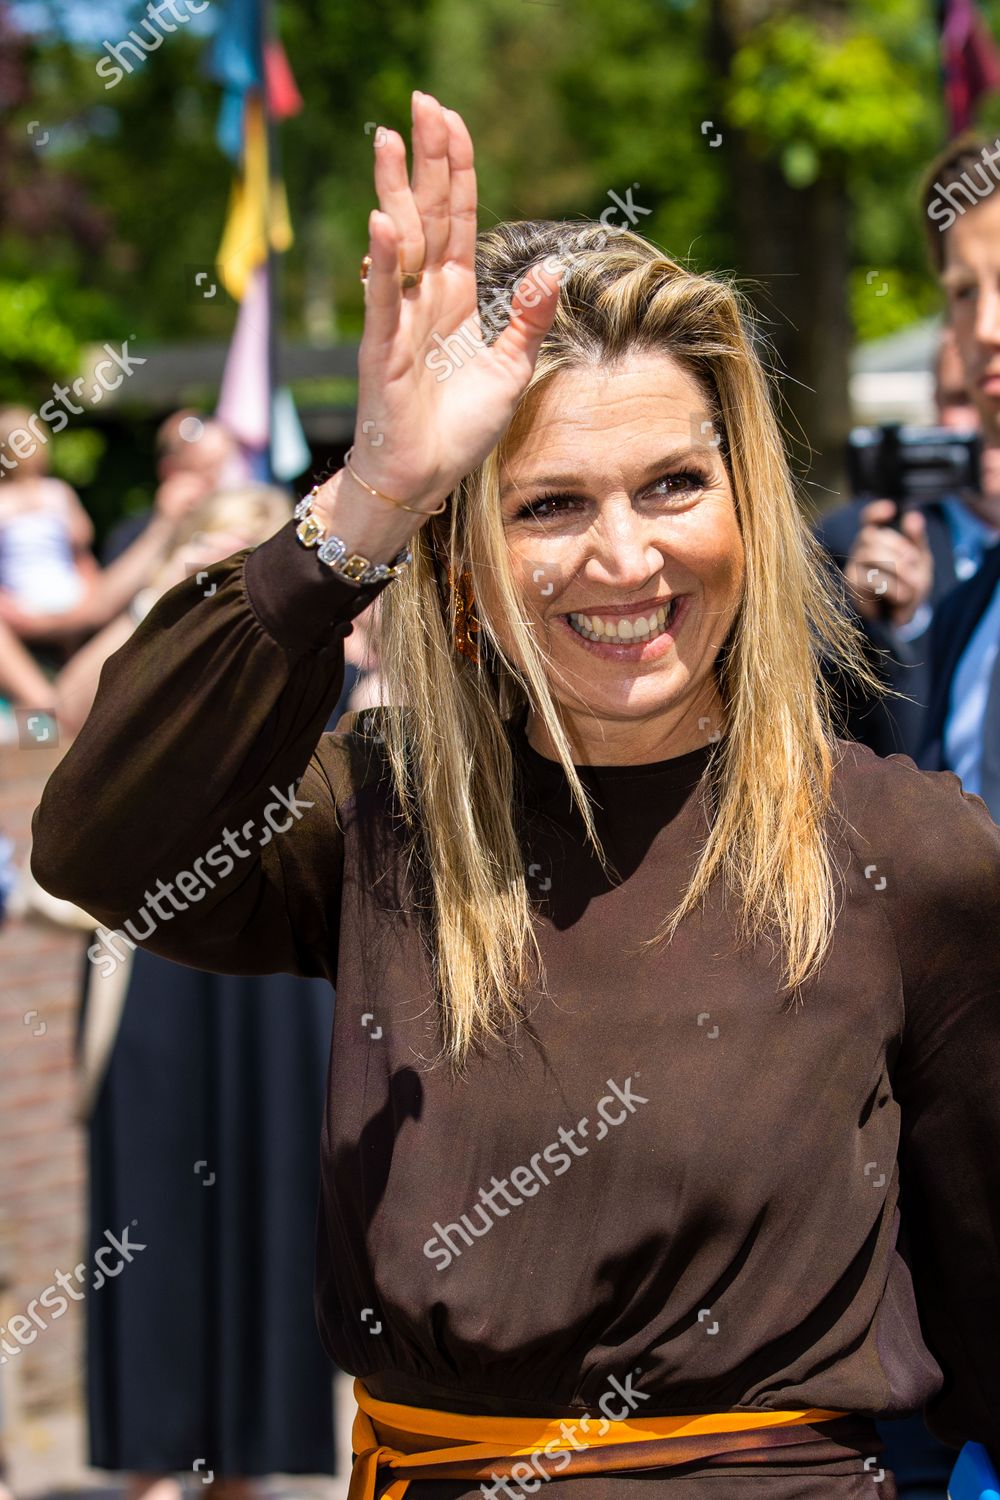 CASA REAL HOLANDESA - Página 10 Queen-maxima-visits-the-zwolle-region-to-discuss-developments-in-the-labor-market-beerze-the-netherlands-shutterstock-editorial-12042484o